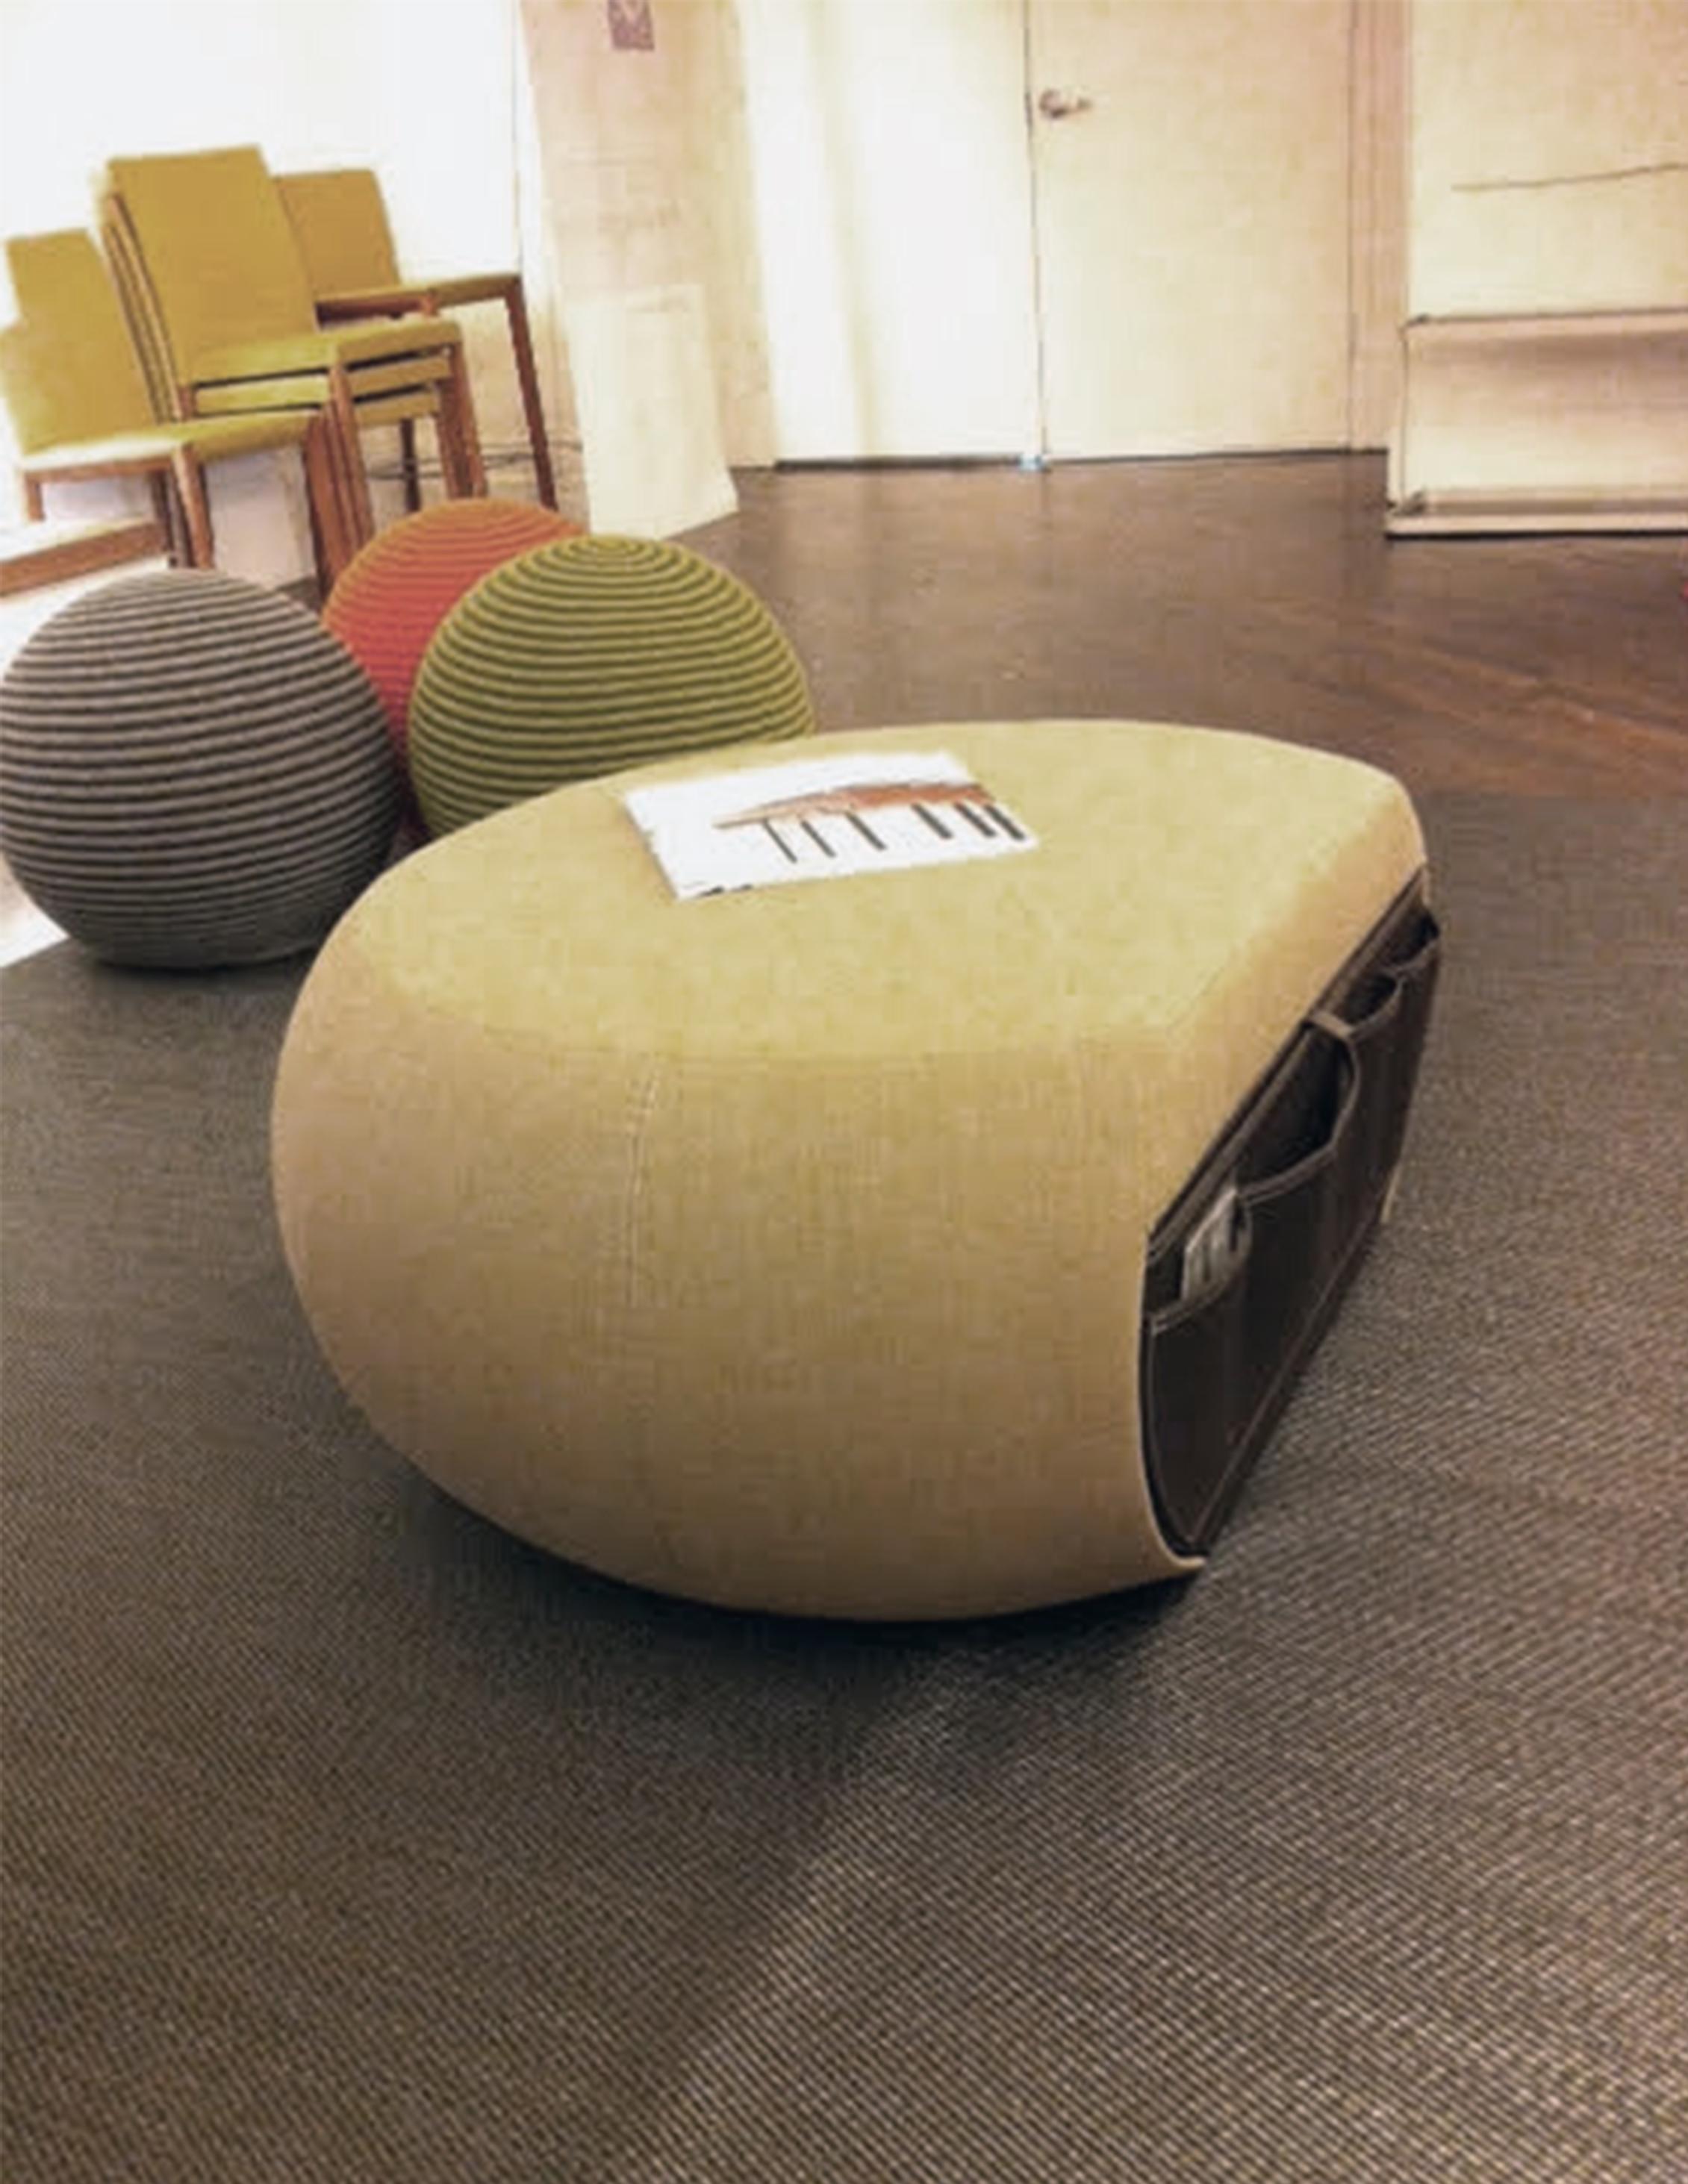 Montis Edam ottoman
(with drawer)
Measures: 31” x 27” x 15.6” H
Ottoman upholstered in fabric with object storage tray. Structure in beech plywood and padding in polyester foam covered in Dacron.